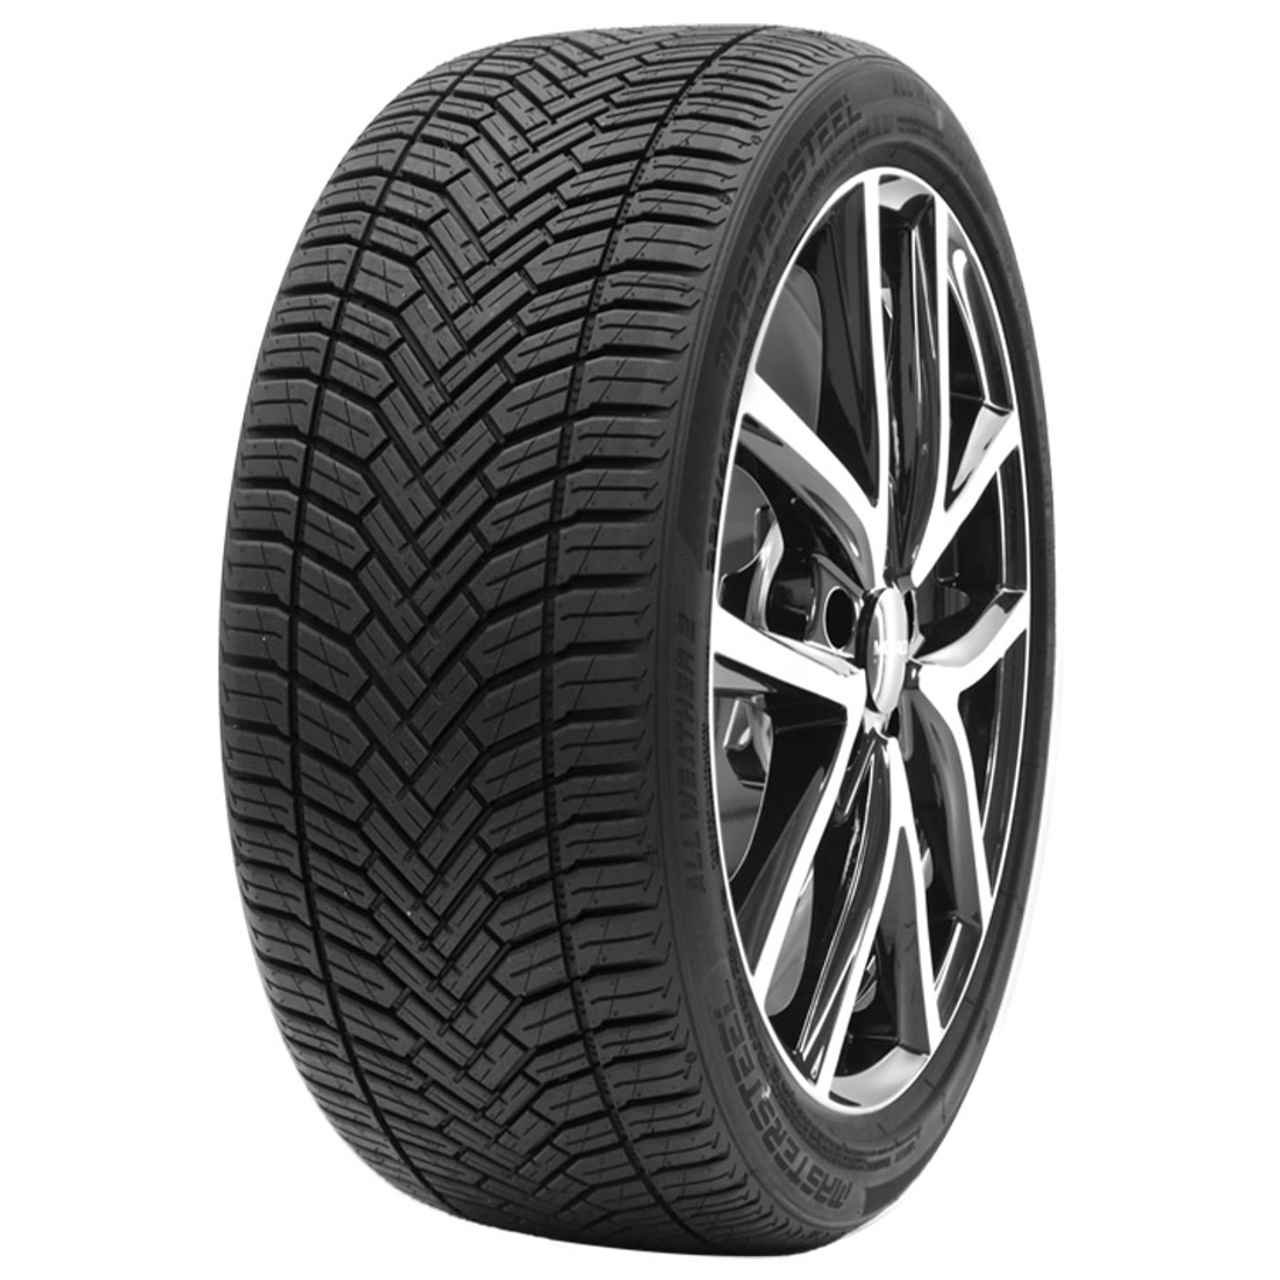 MASTERSTEEL ALL WEATHER 2 185/50R16 81H BSW